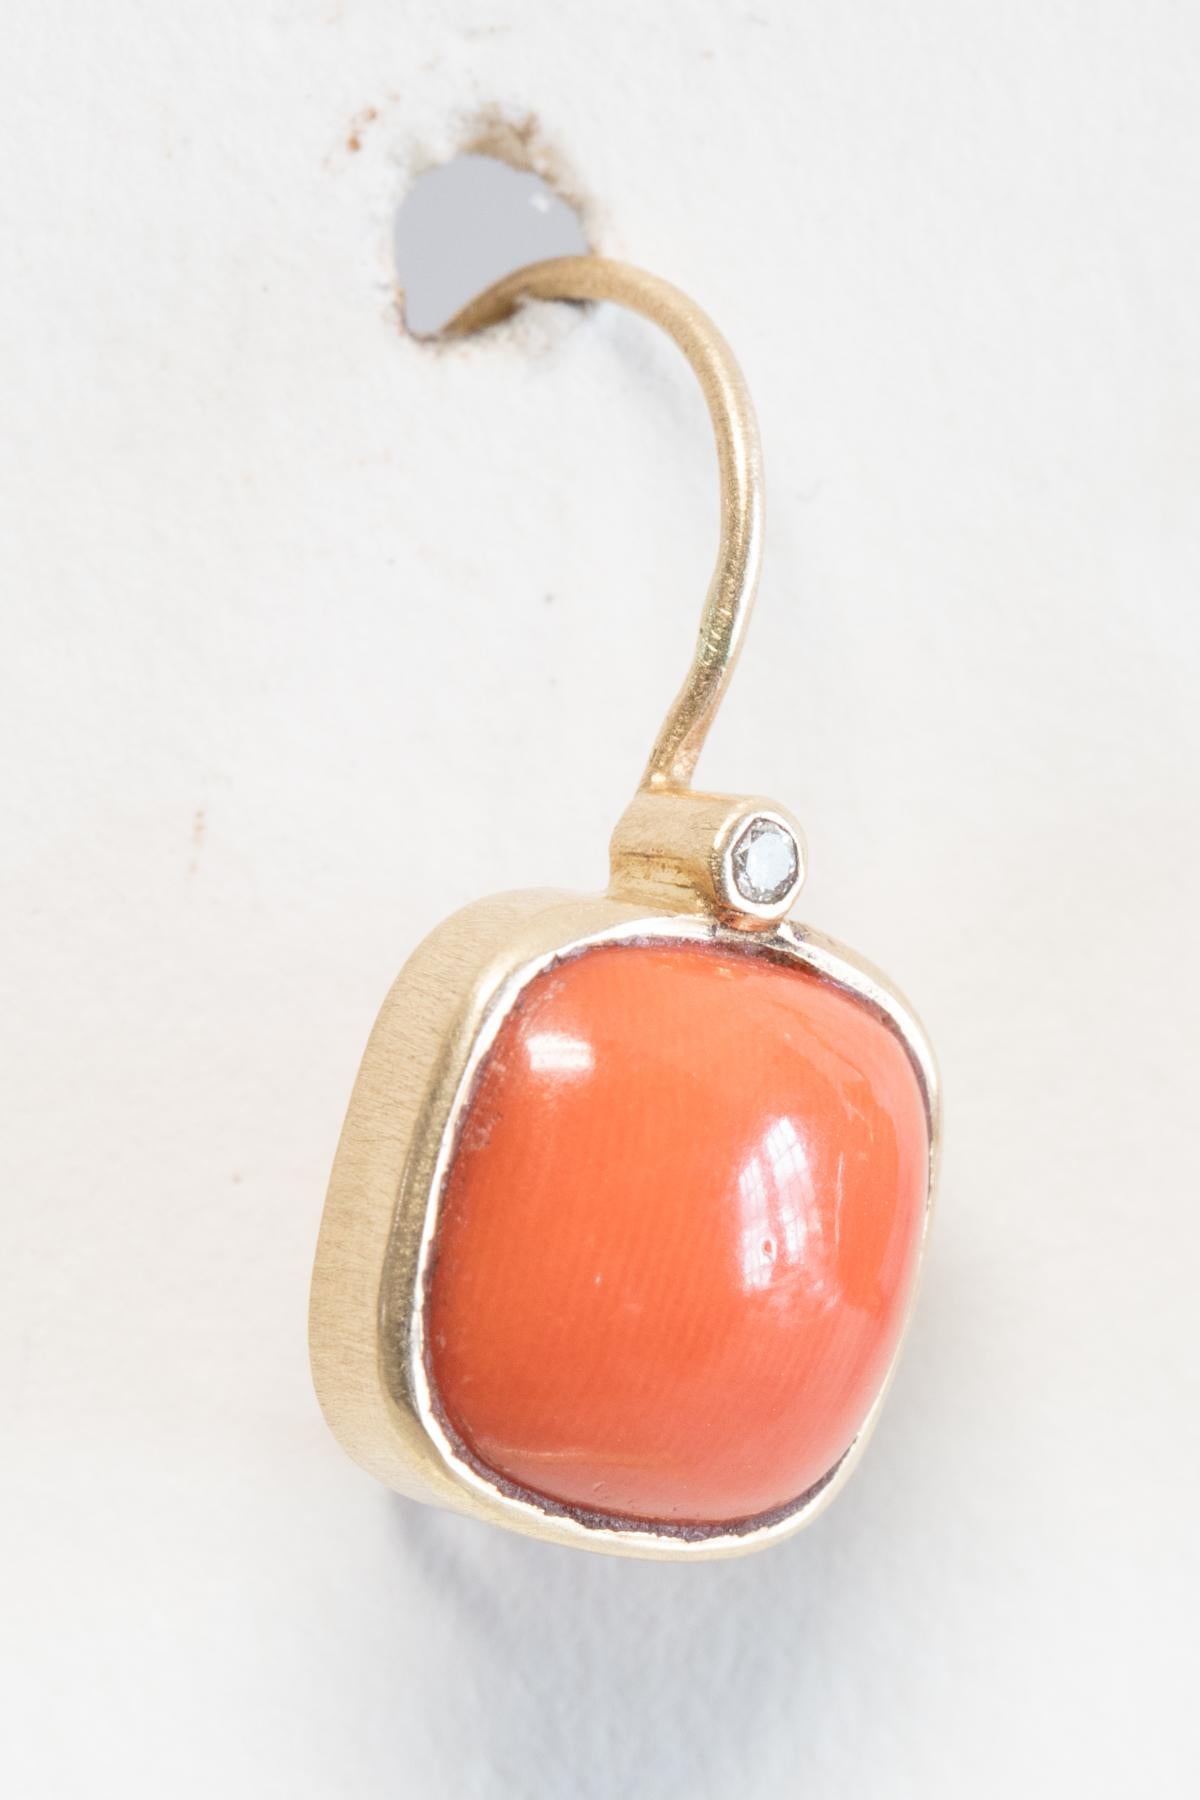 Square cut Italian coral bordered in 18K gold with faceted solitaire diamond at the top.  On French wires for pierced ears.